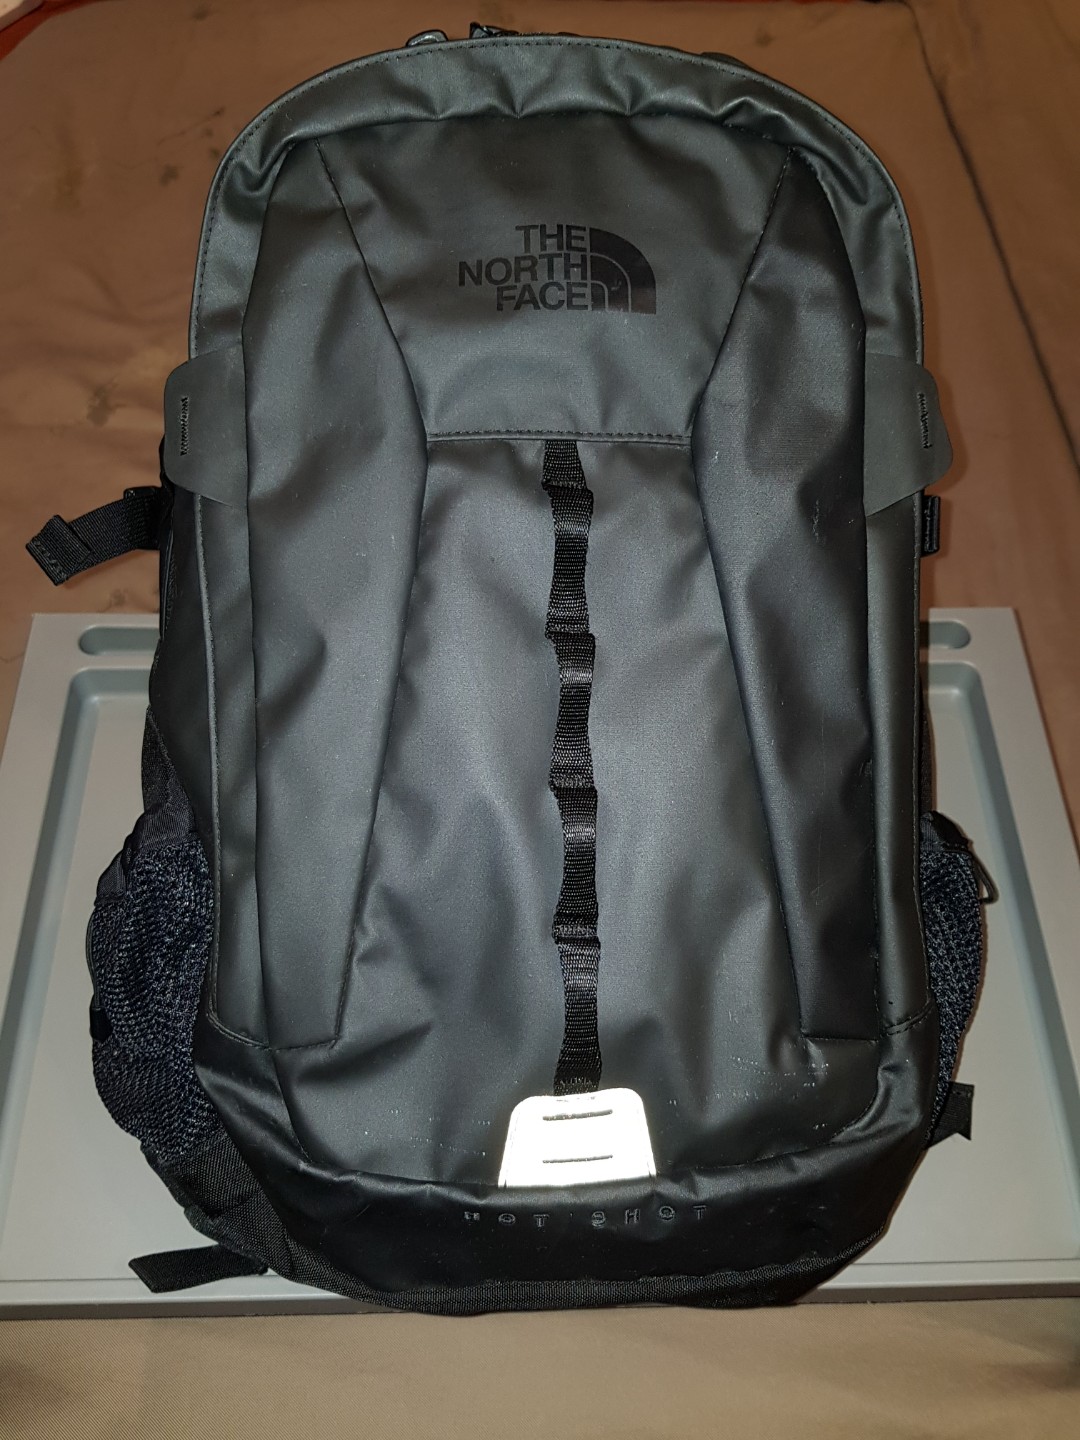 The North Face Hot Shot Backpack, Men's Fashion, Bags, Backpacks 